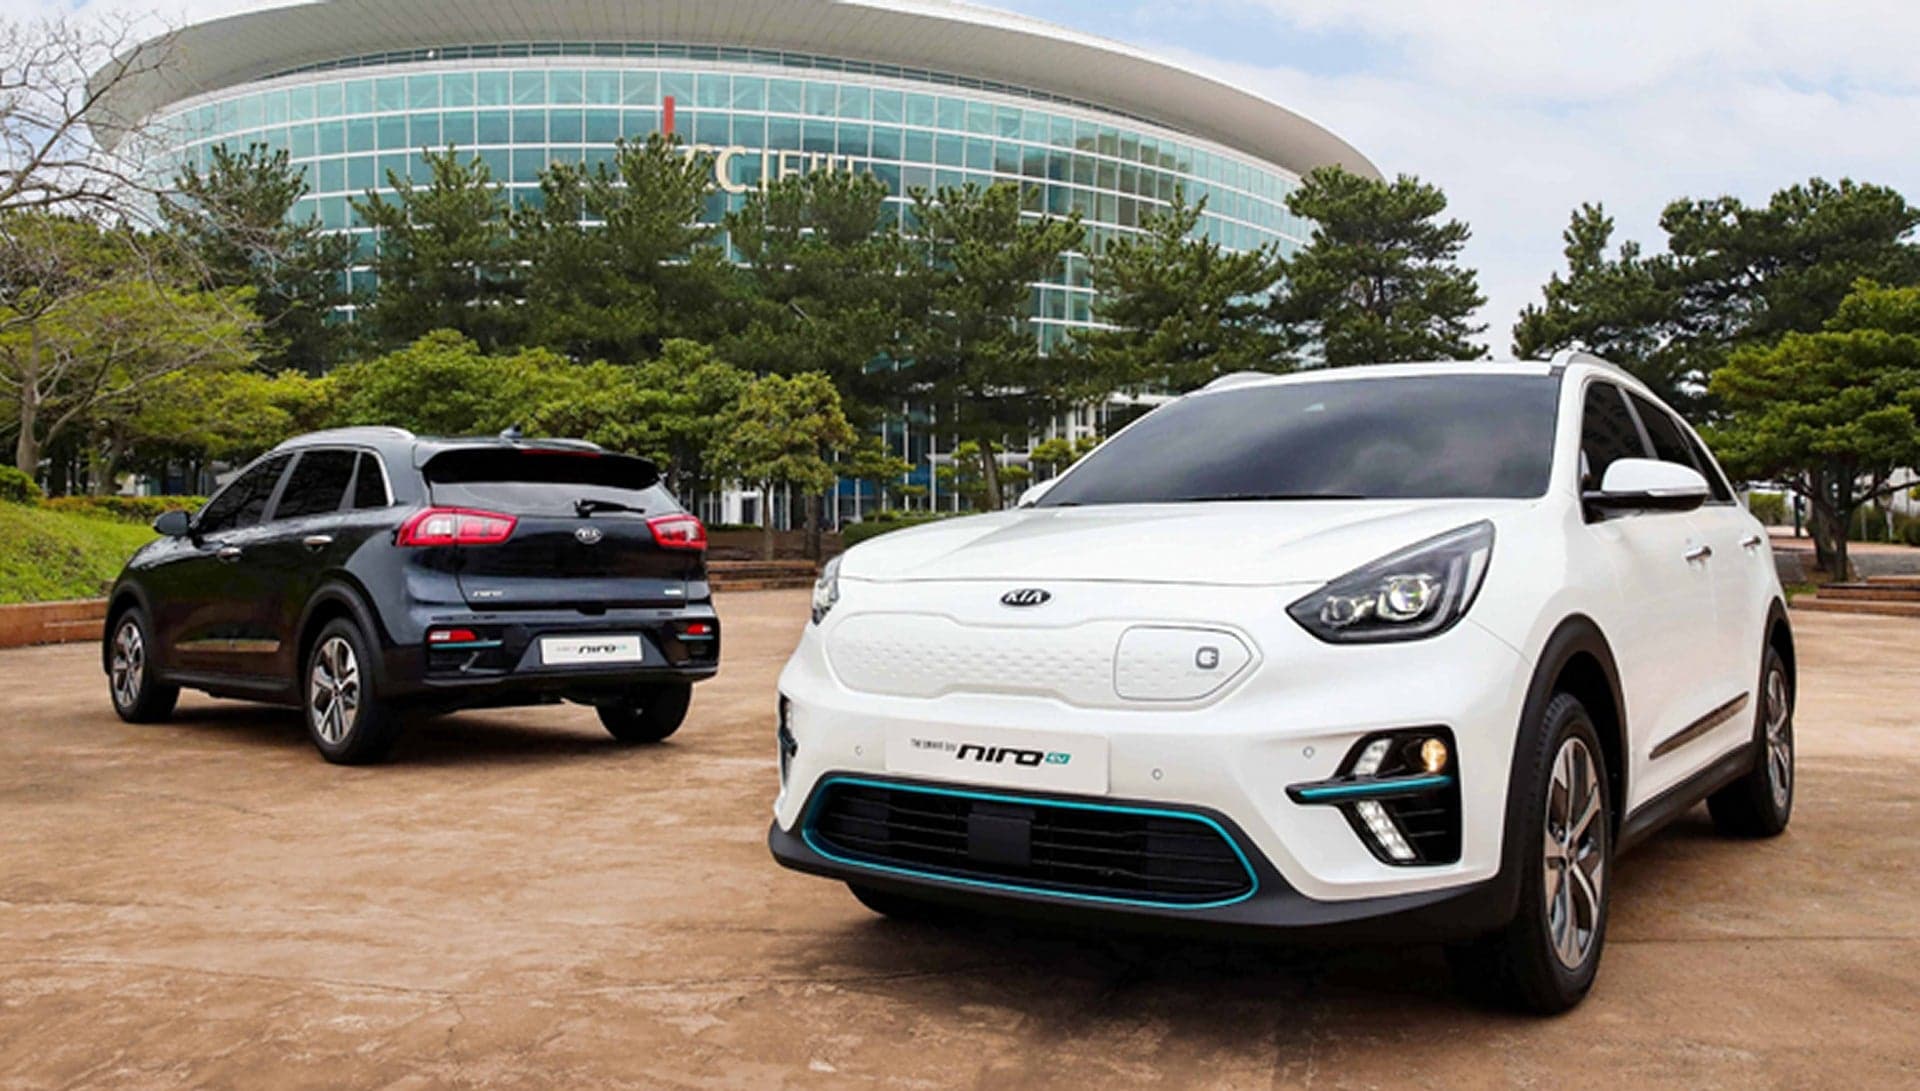 All-Electric Kia Niro Revealed at International Electric Vehicle Expo